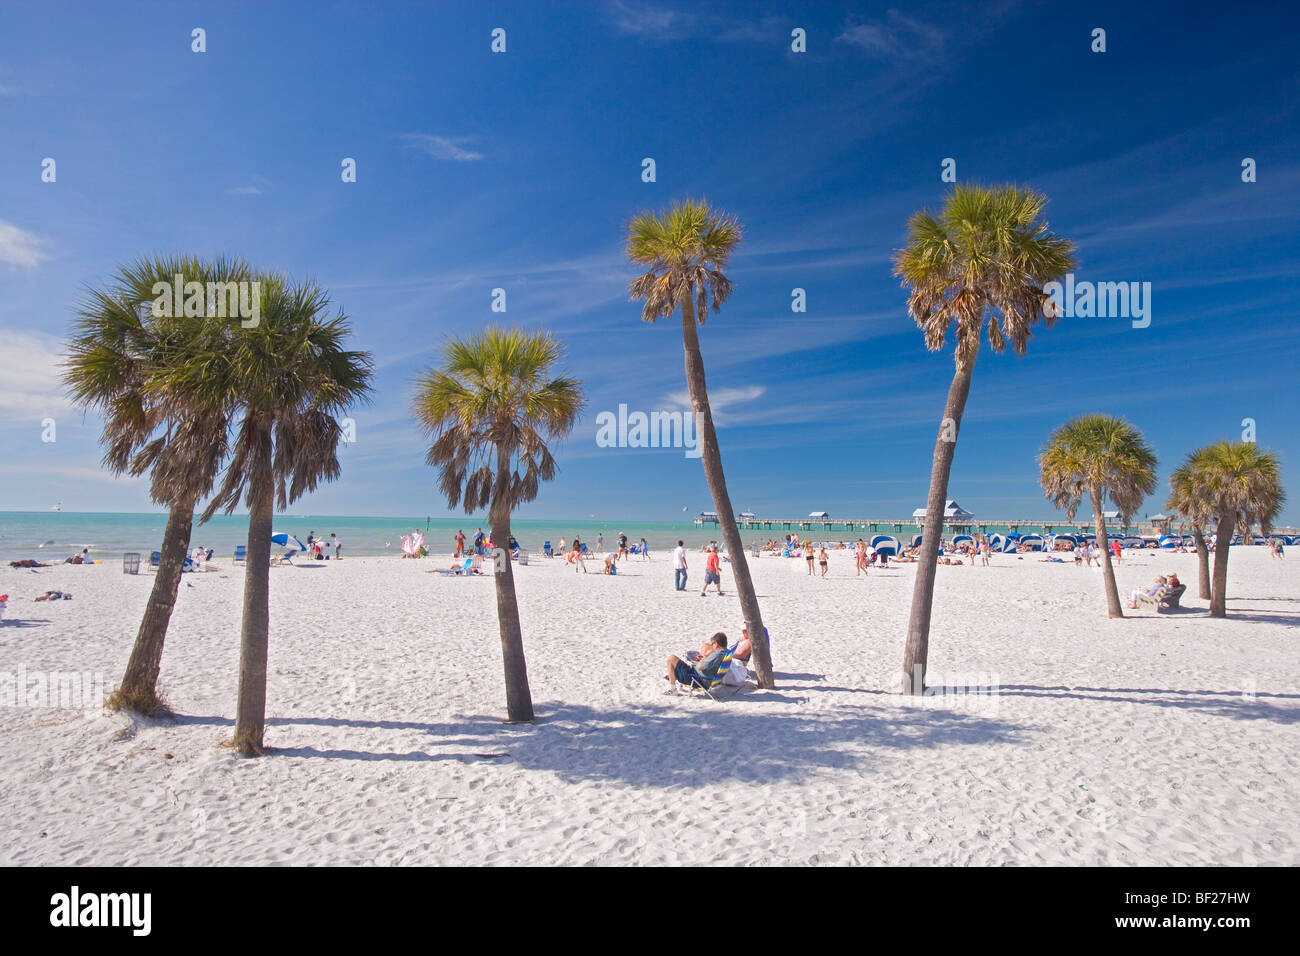 Palm trees at Clearwater Beach under blue sky, Tampa Bay, Florida, USA Stock Photo